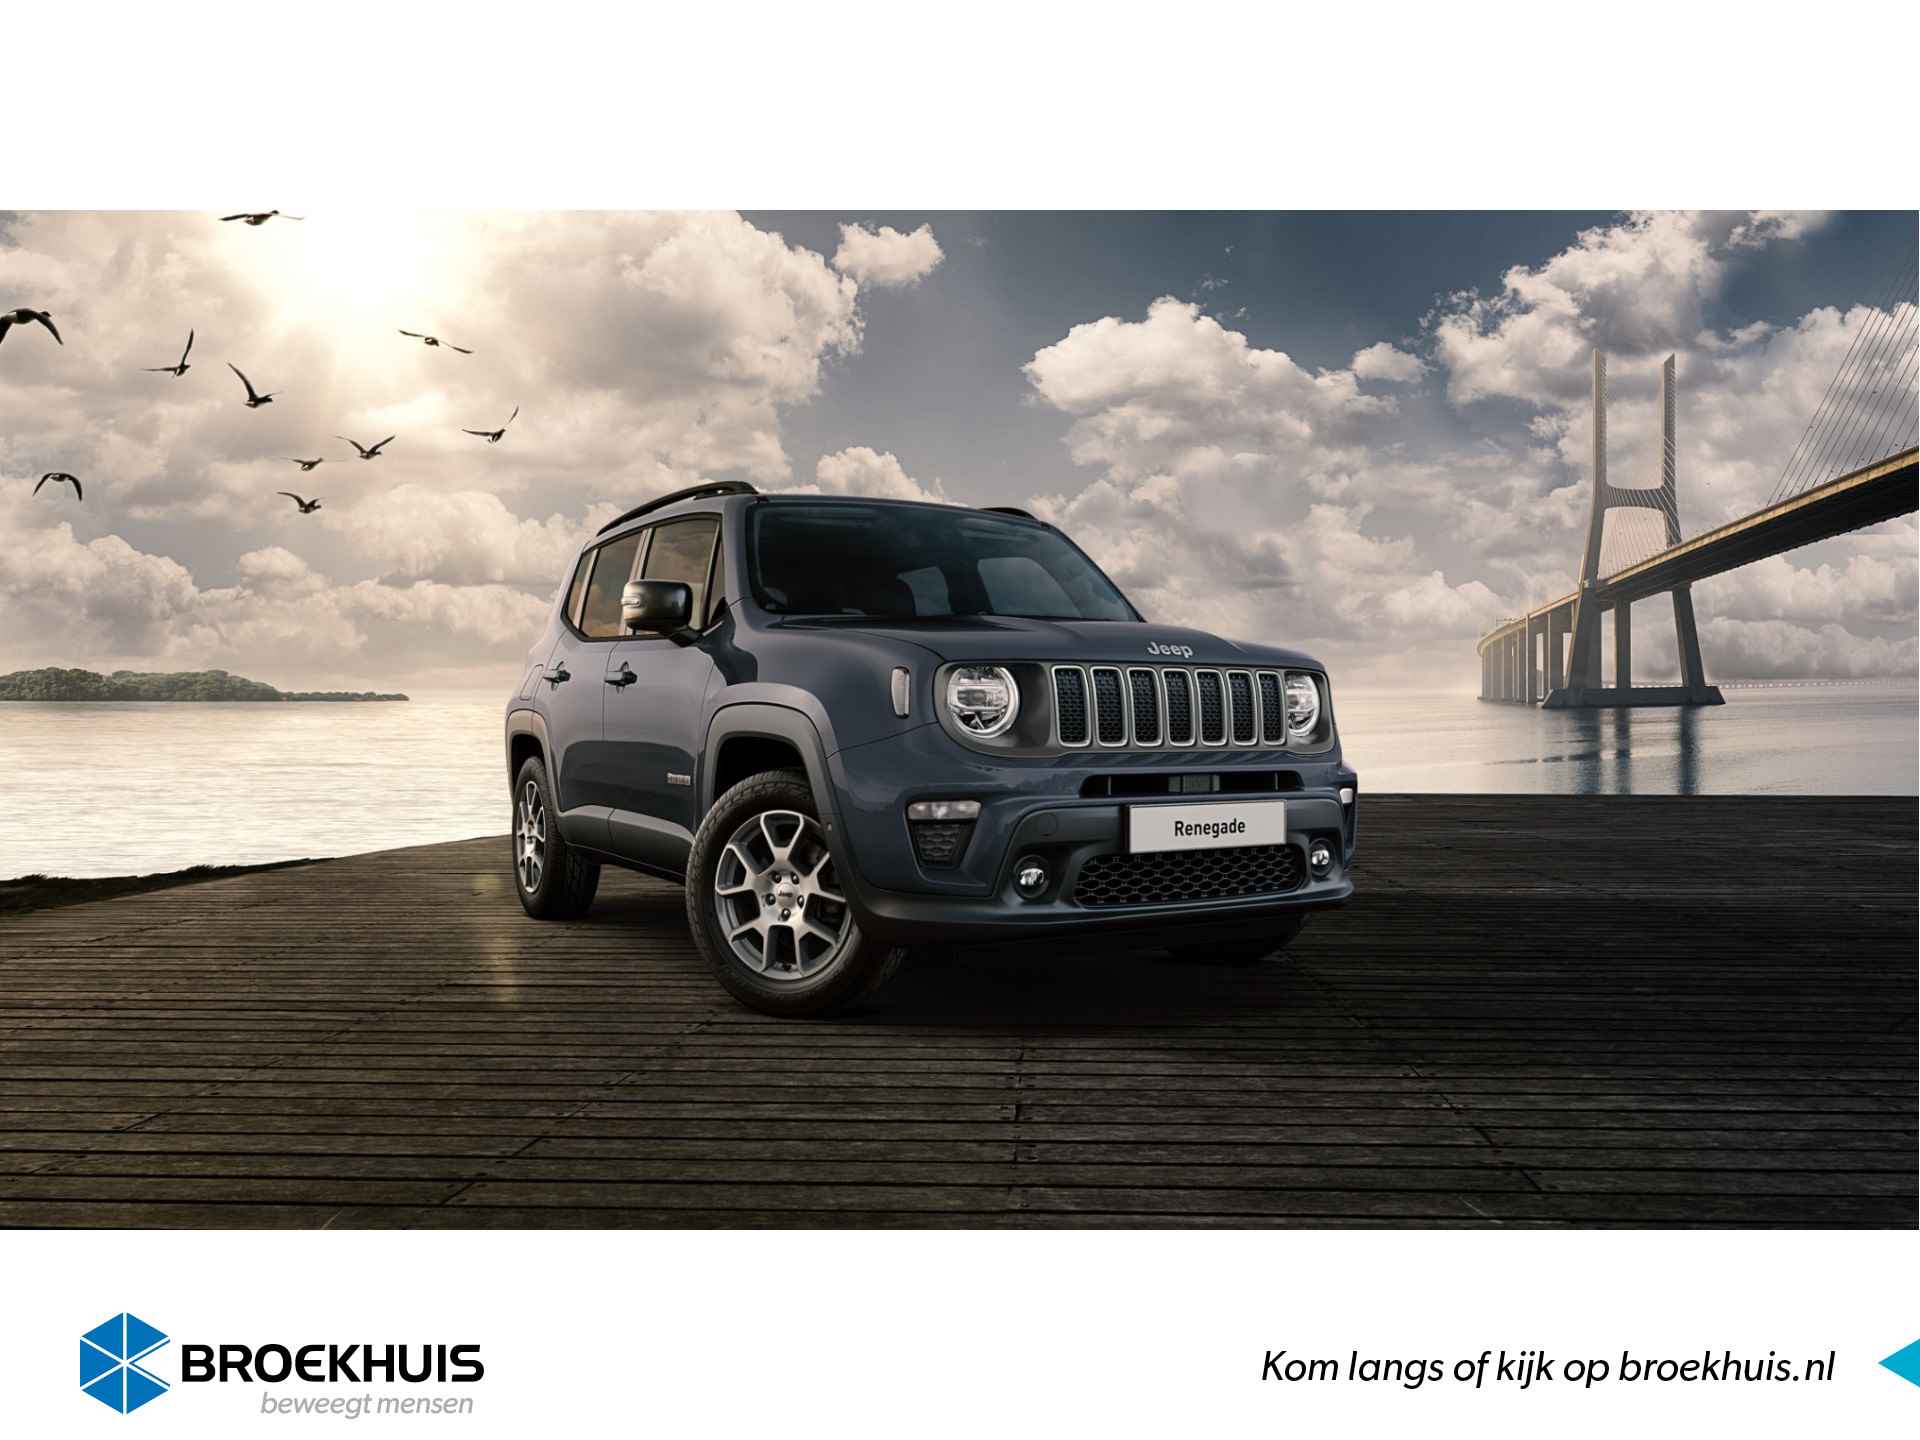 Jeep Renegade 1.5T 130 pk Automaat e-Hybrid Limited Convenience Pack | Style Pack |  Visibility Pack | Uconnect™ LIVE-infotainmentsysteem met 8,4-inch Touchscreen, Navigatie en Bluetooth - 1/9